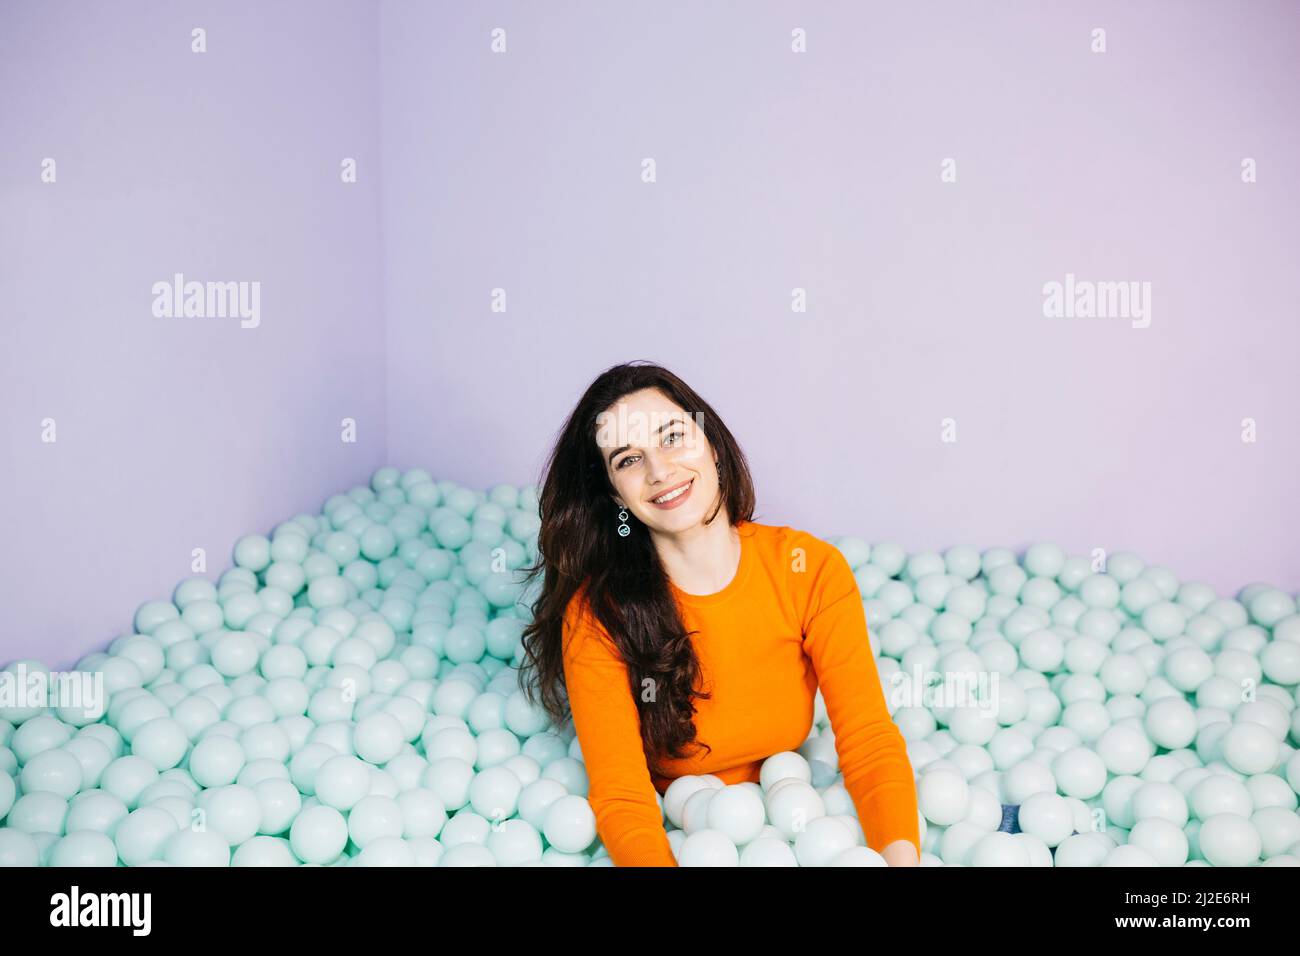 Portrait of brunette caucasian young woman with long hair, sitting in a swimming pool filled with balls Stock Photo